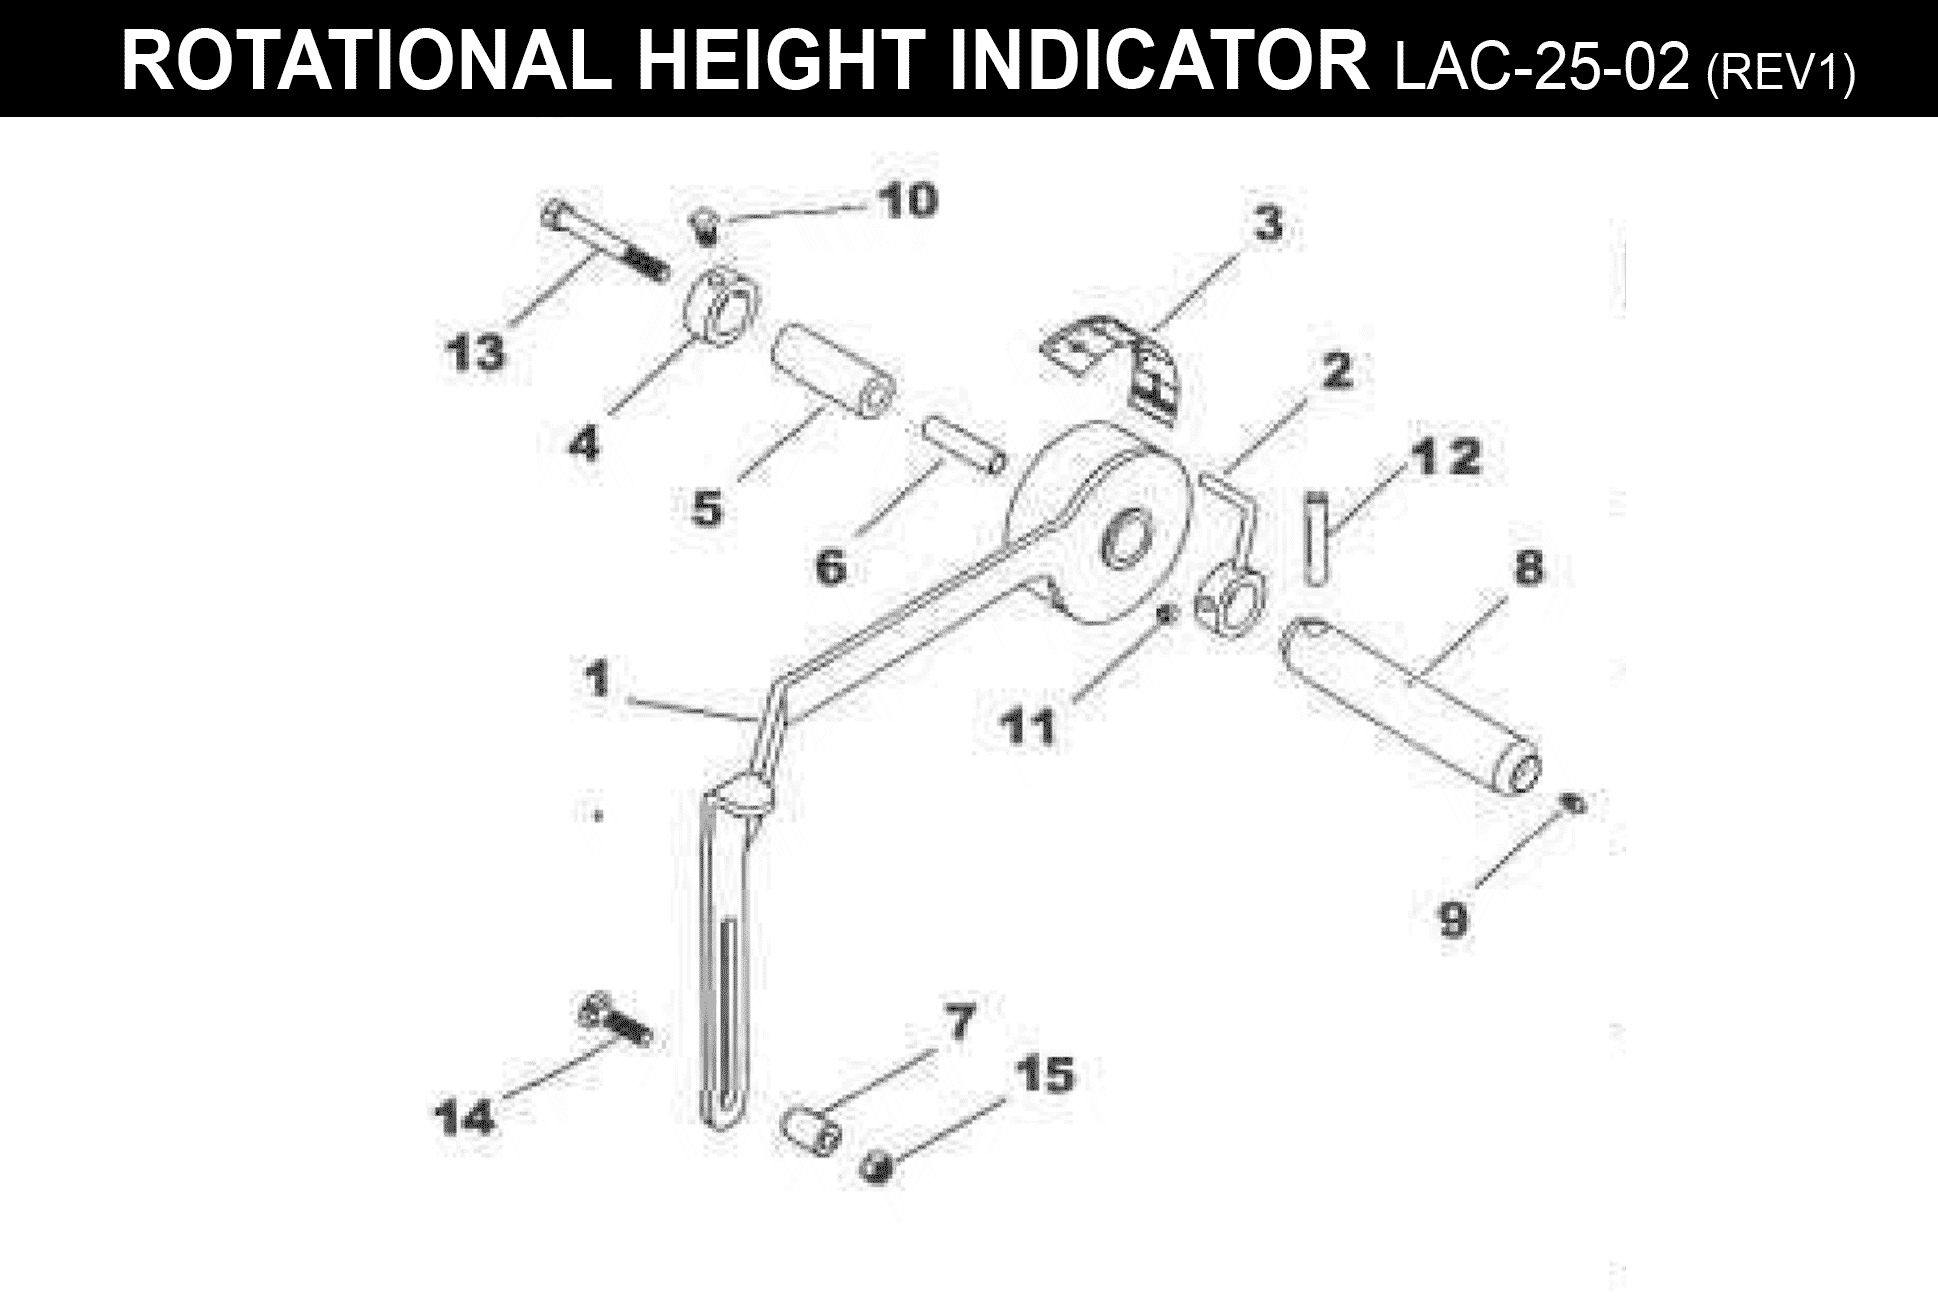 Height Indicator - LAC-25-02 (Rev. 1)